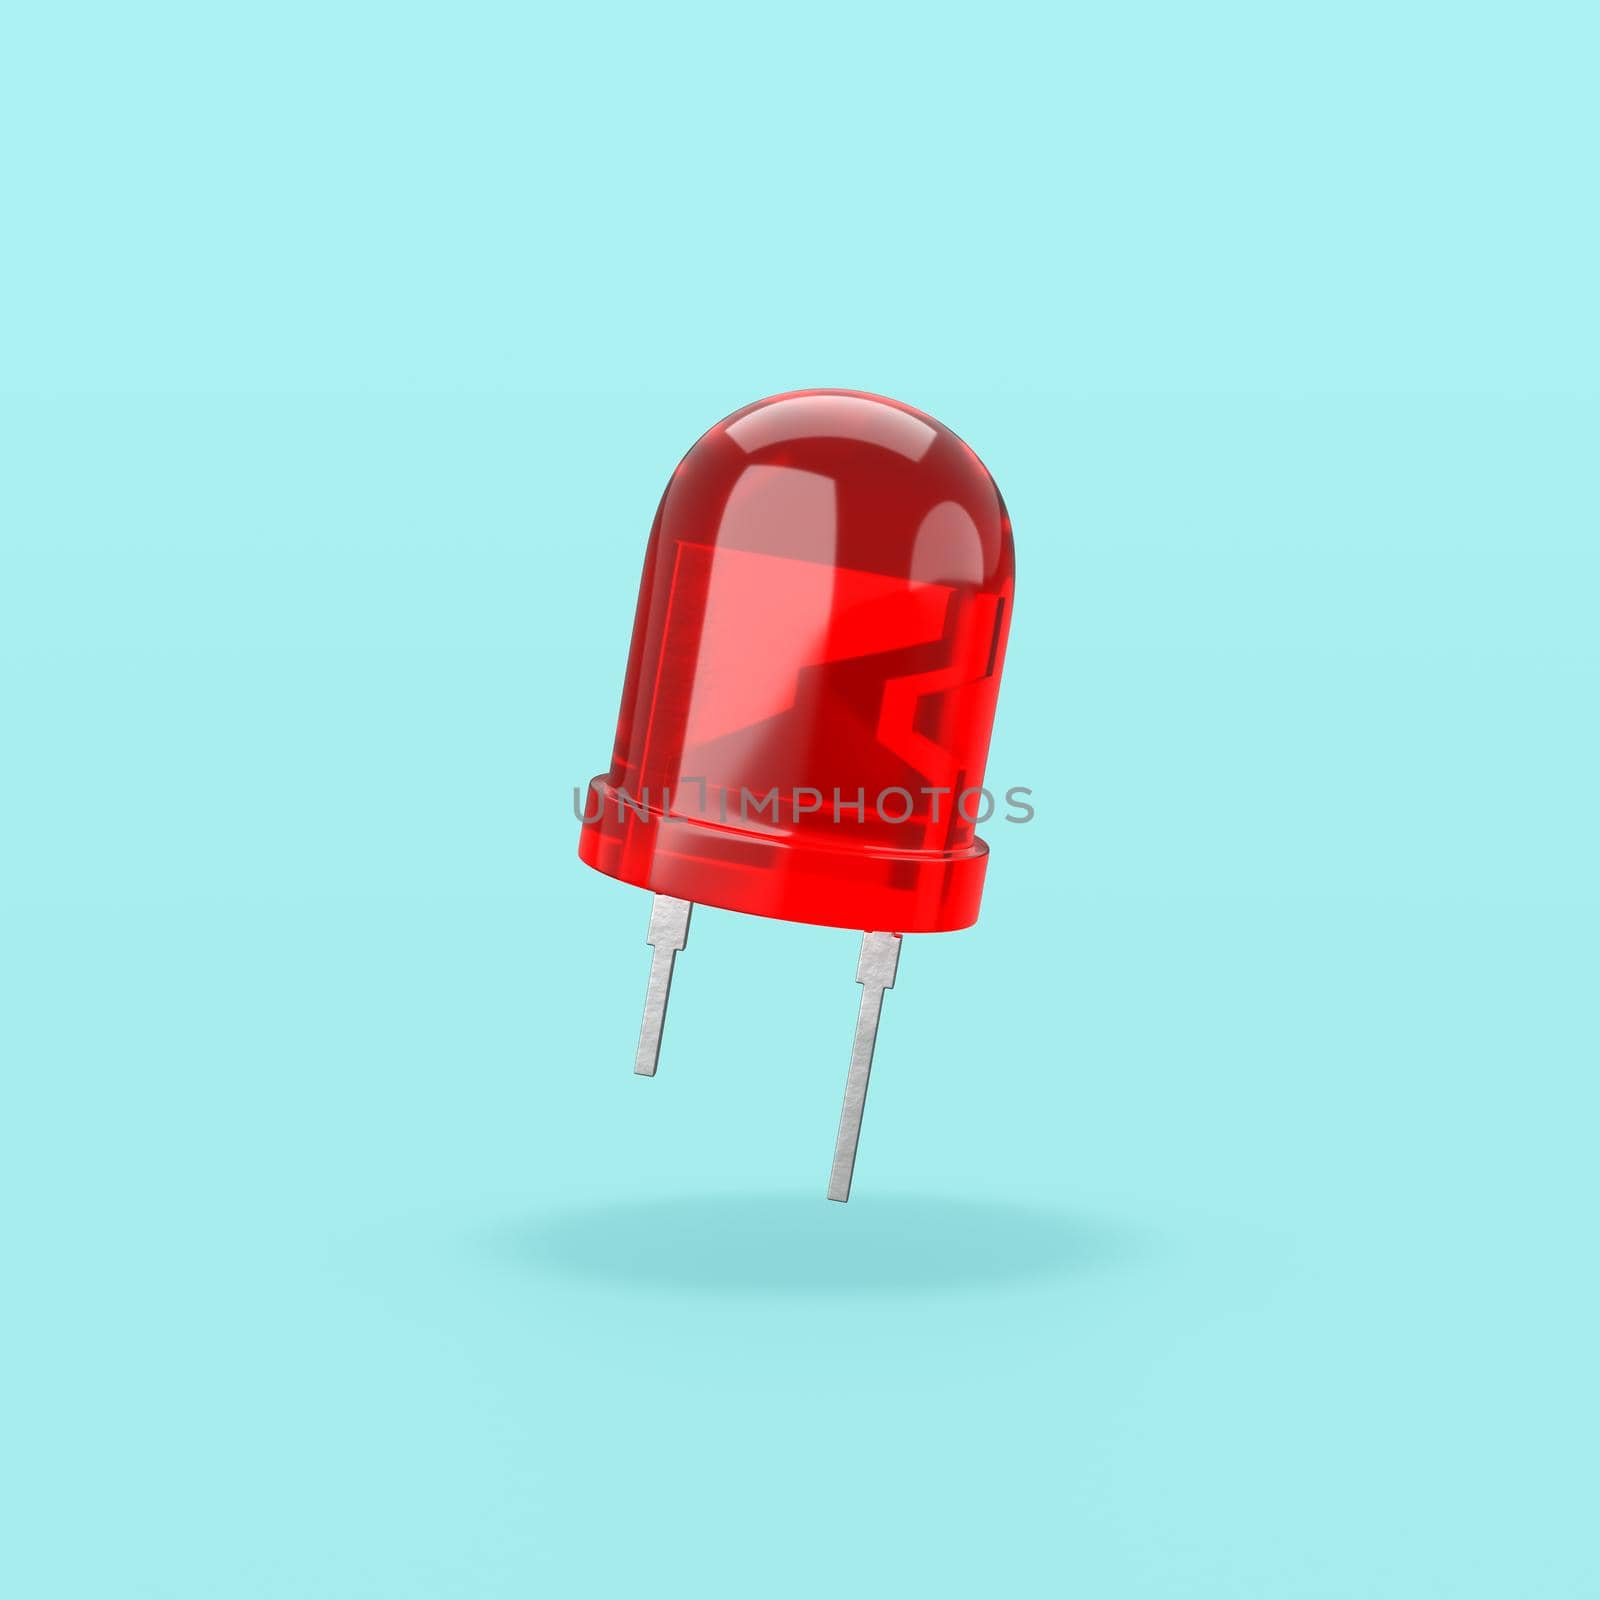 One Red Led Diode on Flat Blue Background with Shadow 3D Illustration